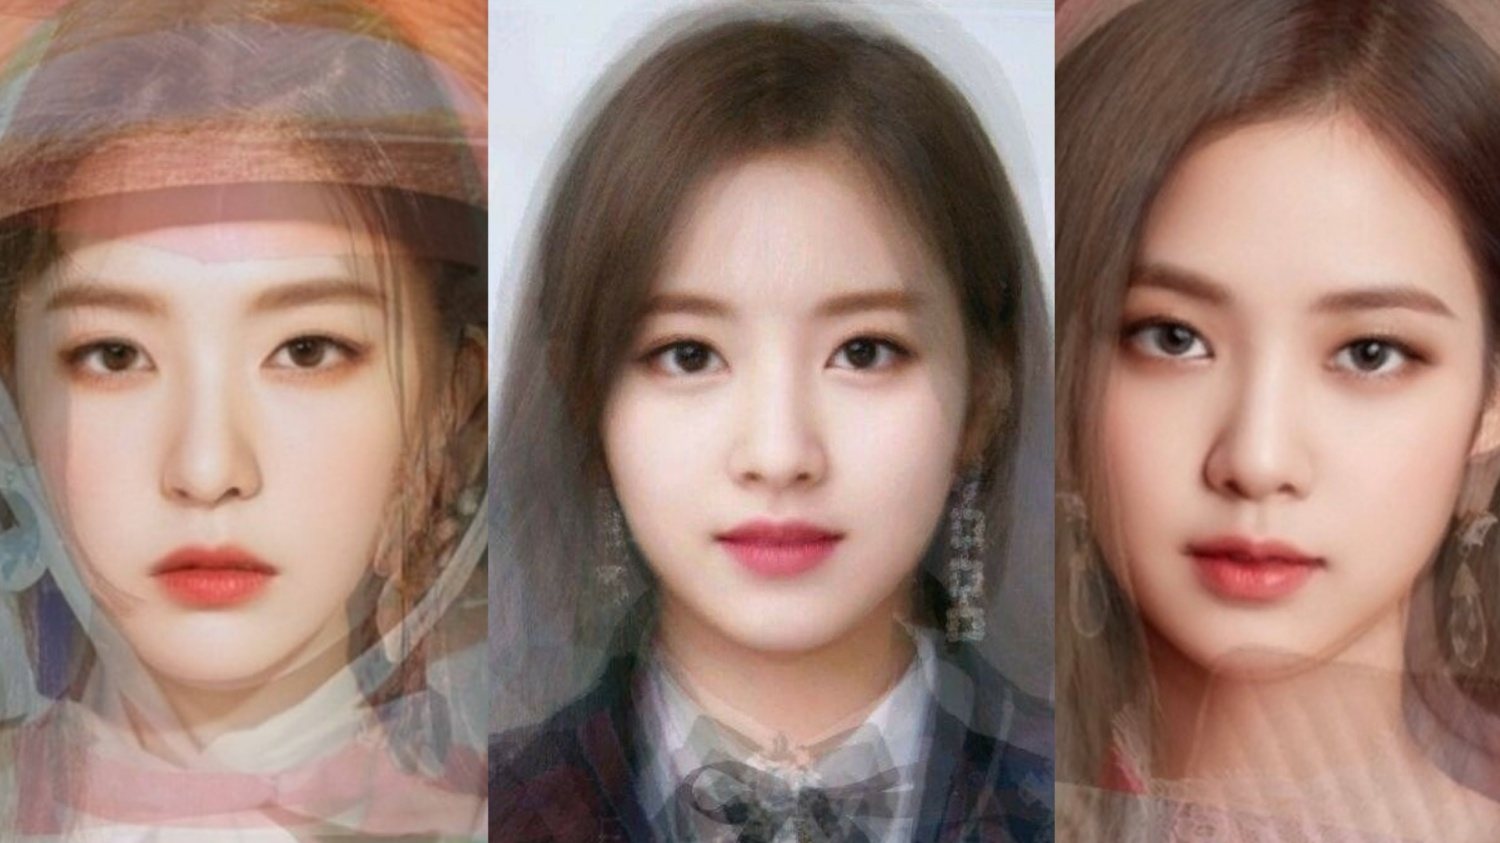 The Average Faces of These Girl Groups Will Shock You: Can You Guess